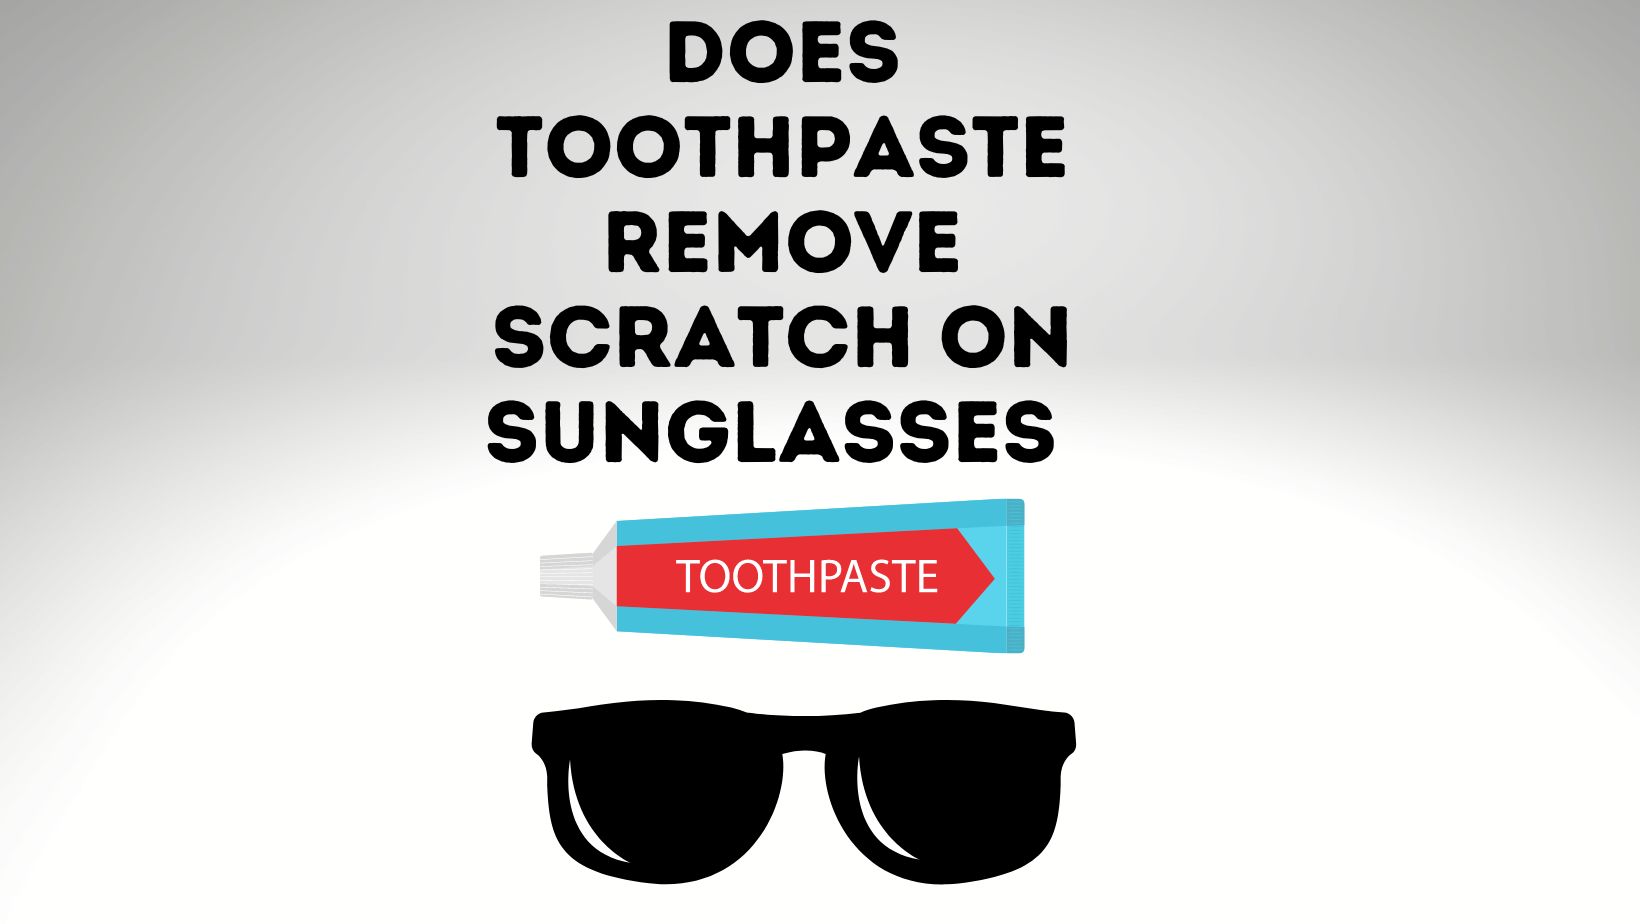 Does Toothpaste Get Rid Of Scratches On Sunglasses?